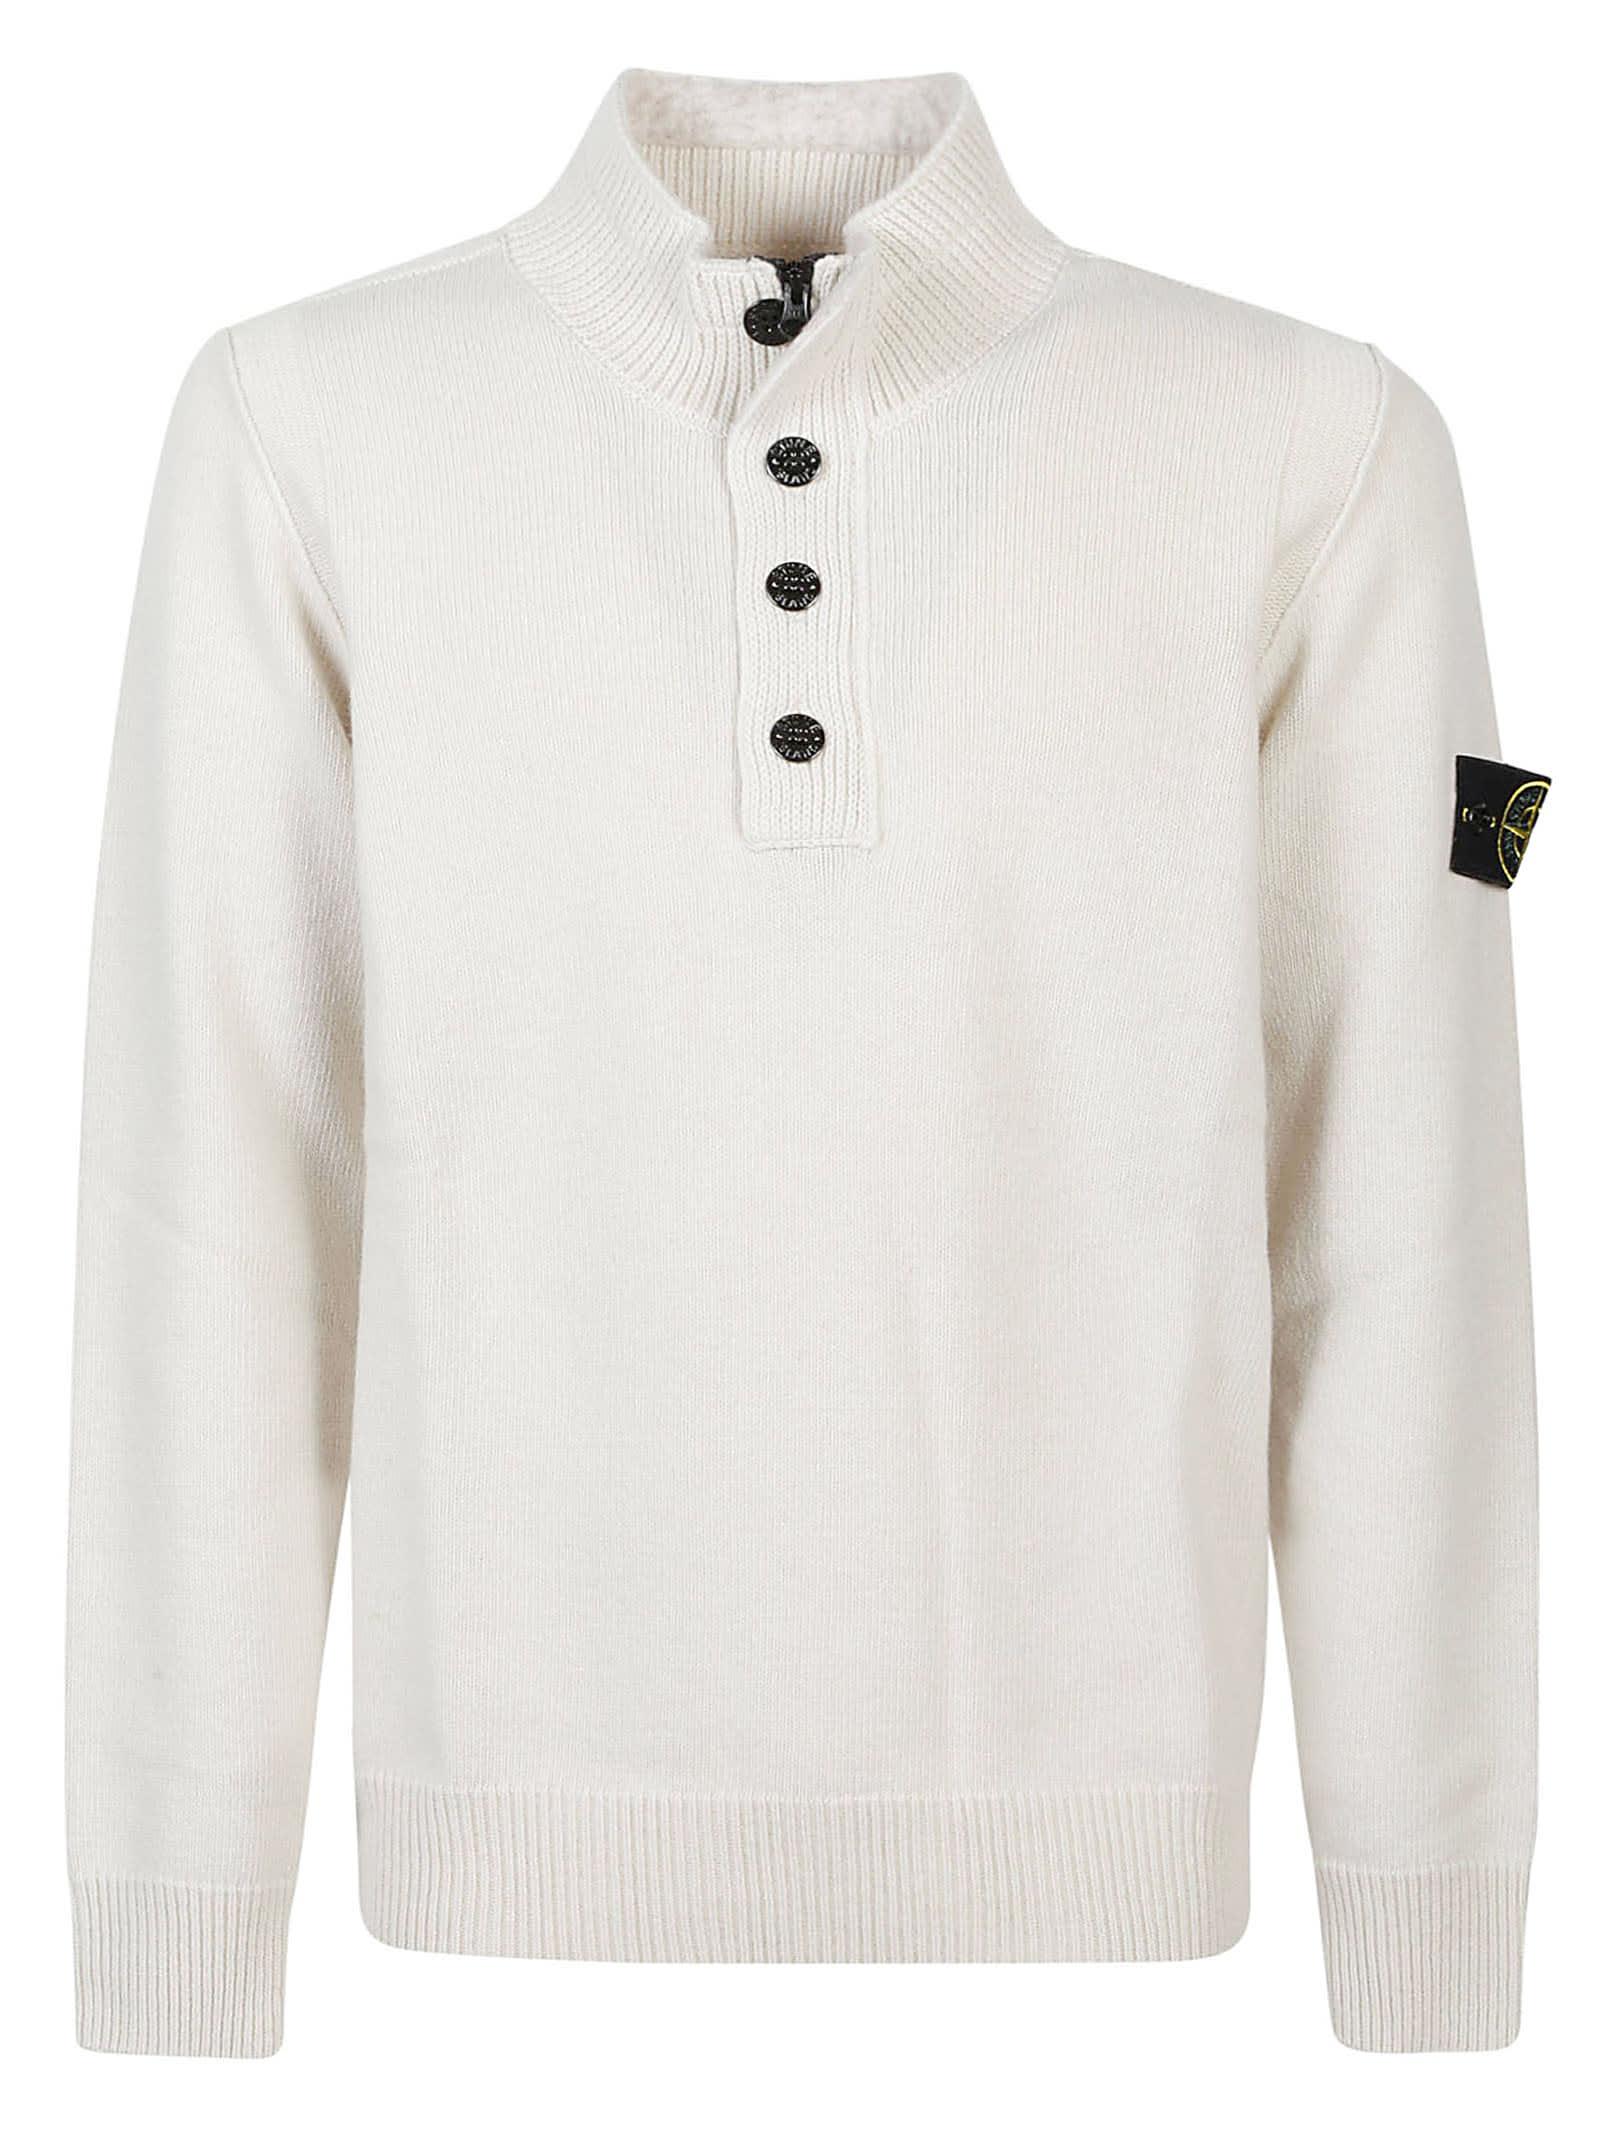 Stone Island Sweater in White for Men | Lyst